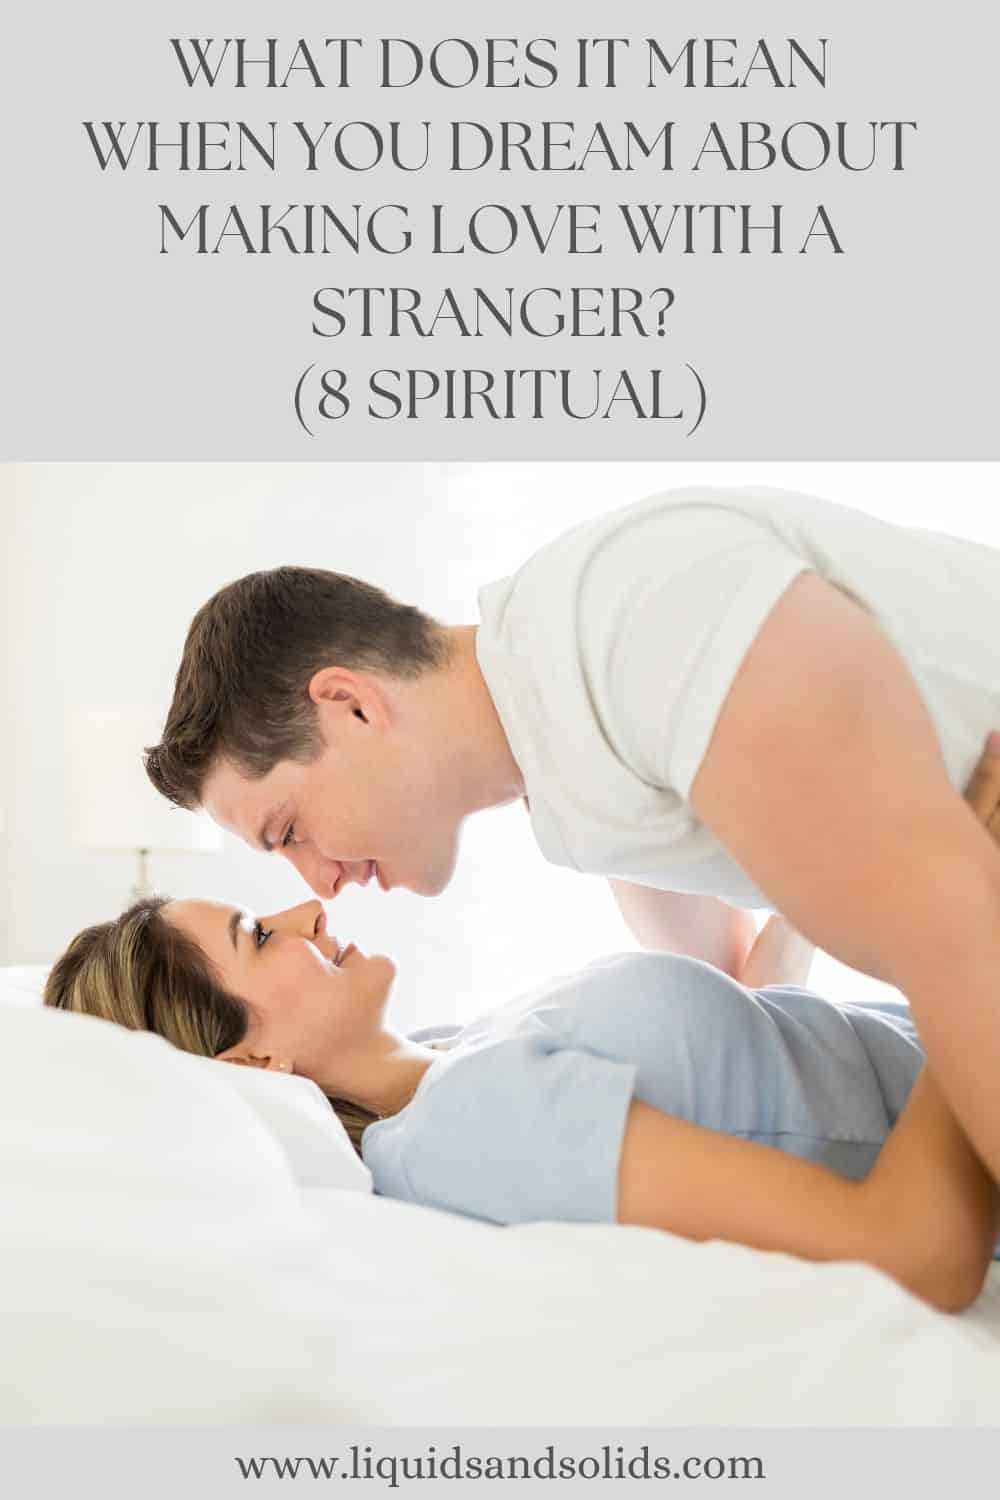 What Does It Mean When You Dream About Making Love With A Stranger? (8 Spiritual)